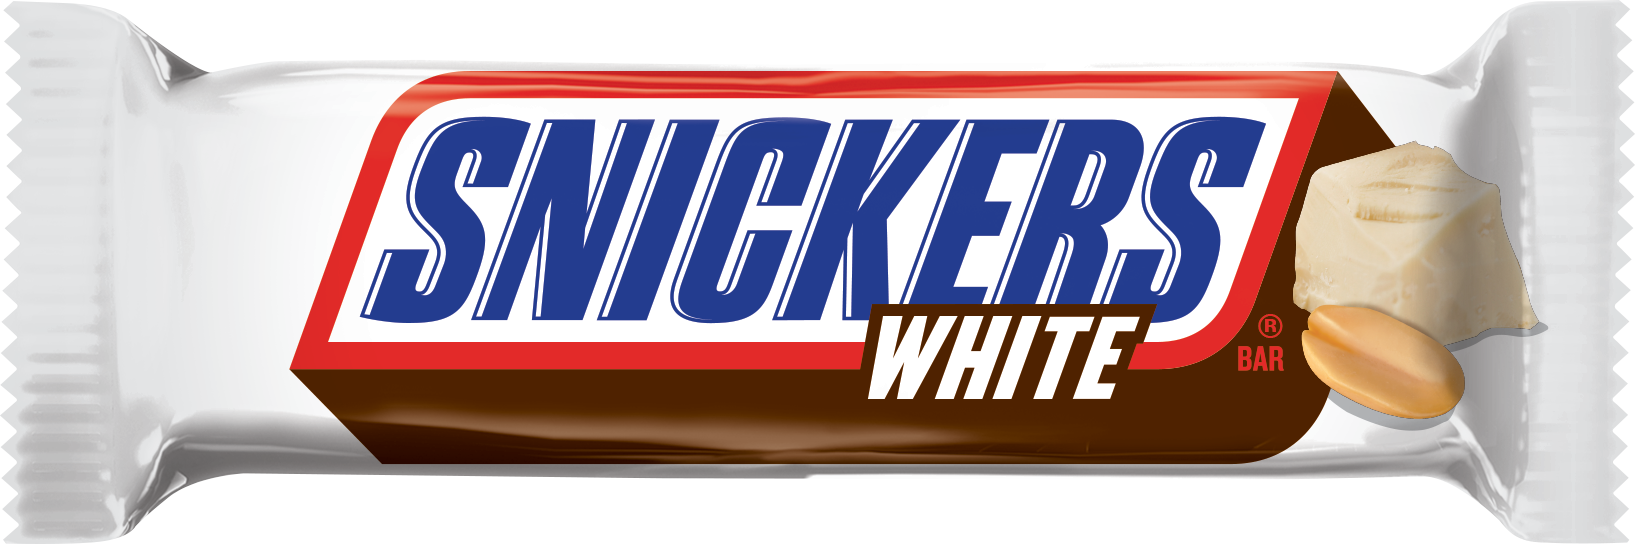 Snickers White Chocolate Bar Packaging